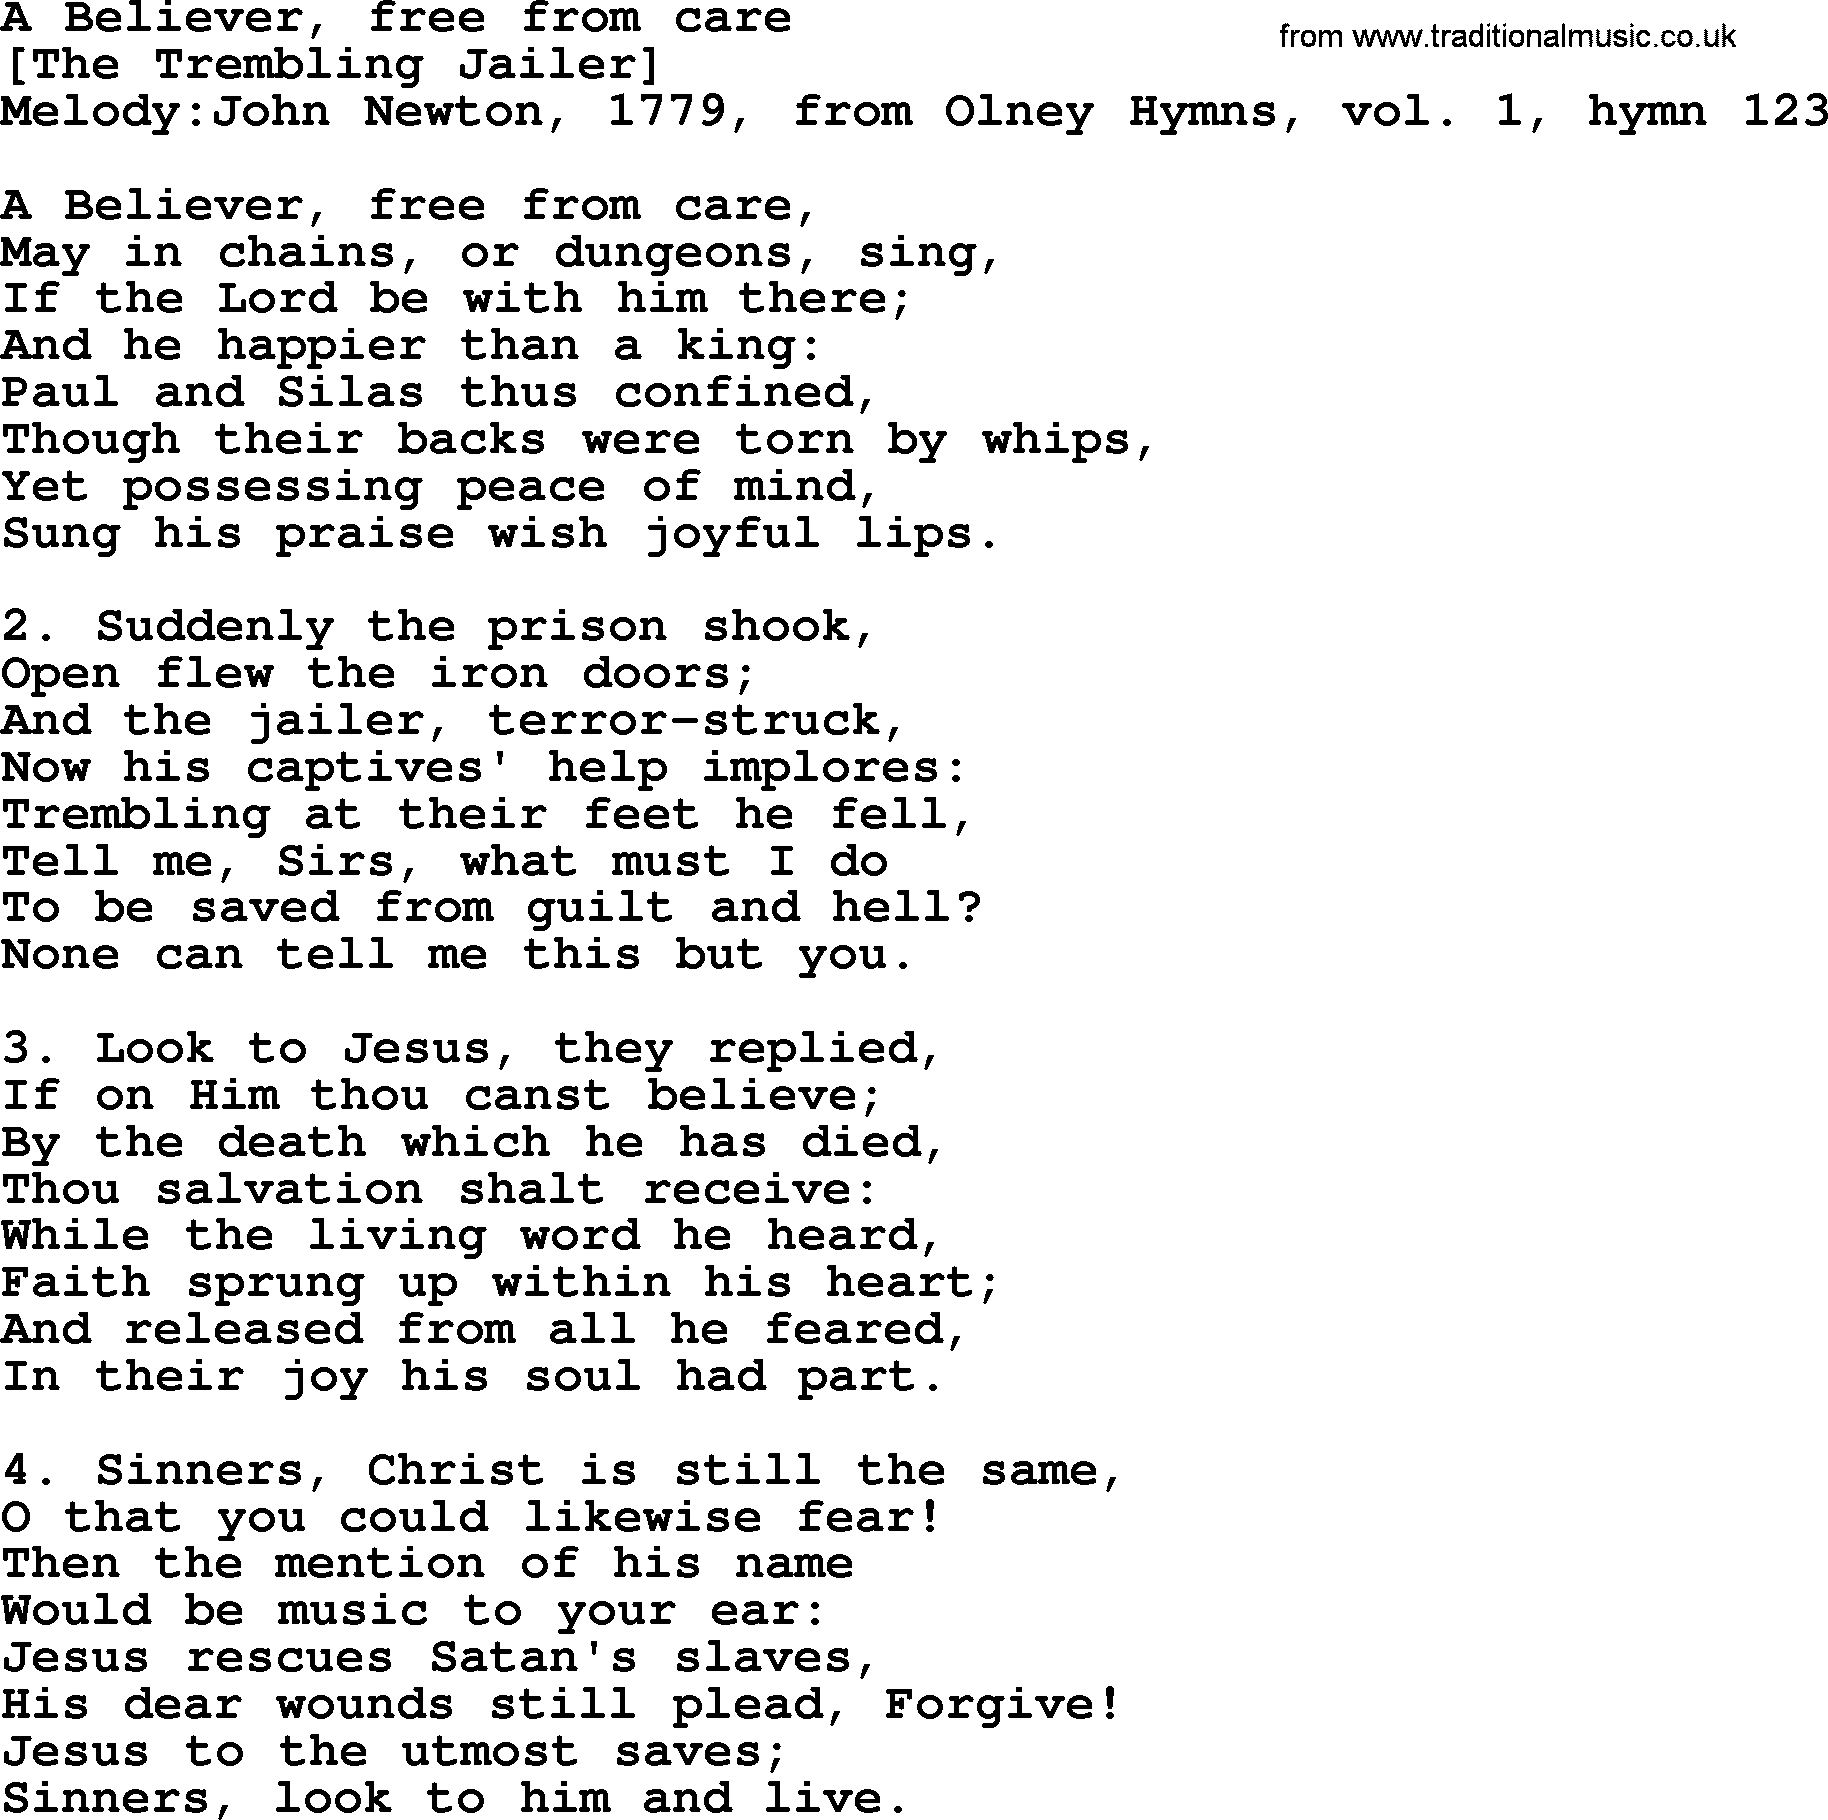 Old English Song Lyrics For A Believer Free From Care With Pdf